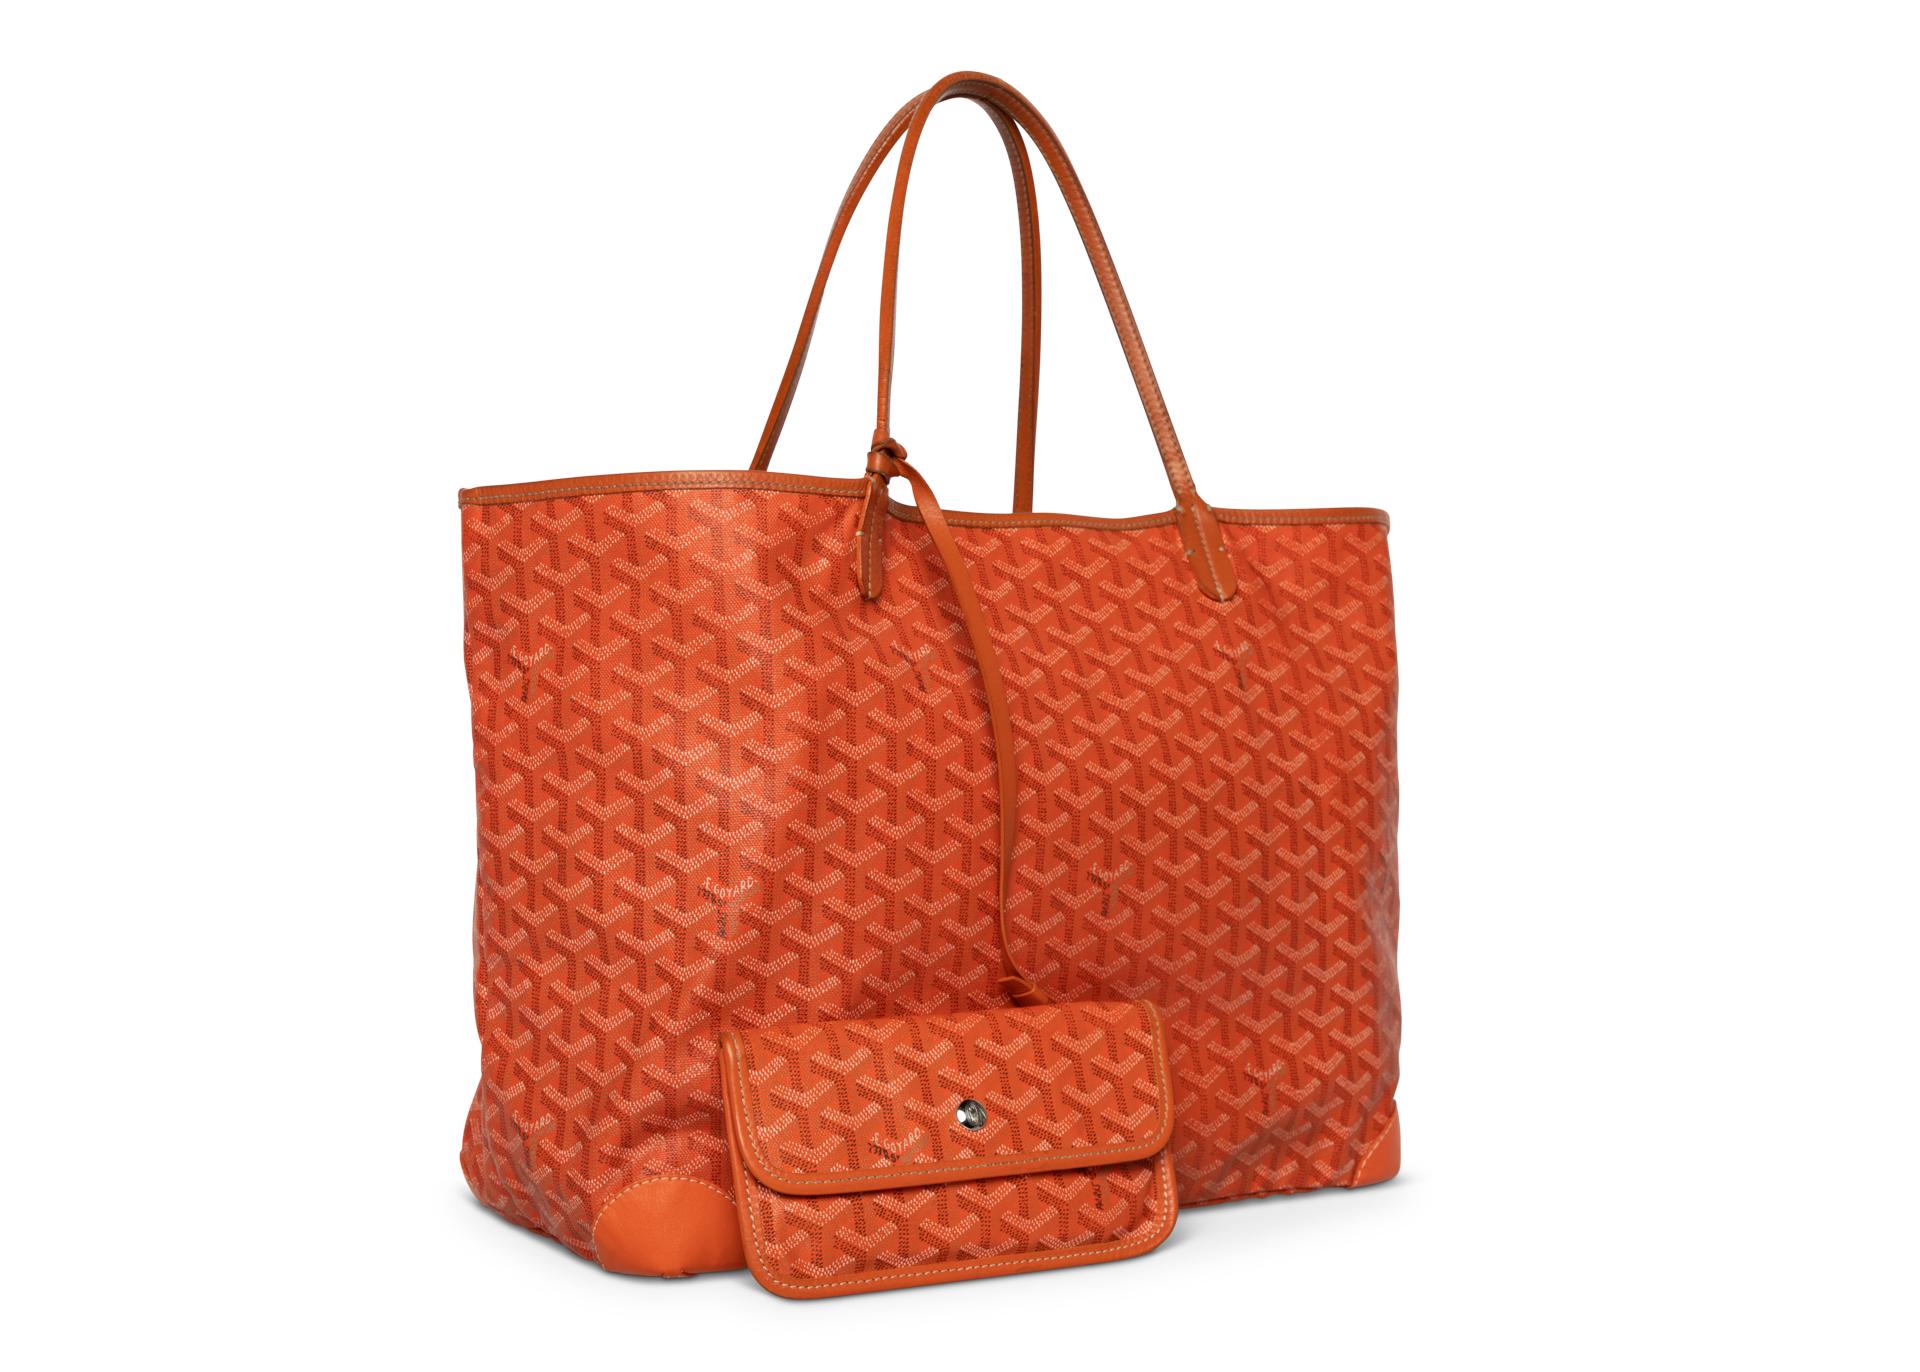 Founded in 1792, Goyard started as a specialty trunk-shop under the moniker Maison Martin. Due to the quality product and excellency of service, Goyard became a favorite of many French aristocrats of the day. Compared to other luxury fashions,